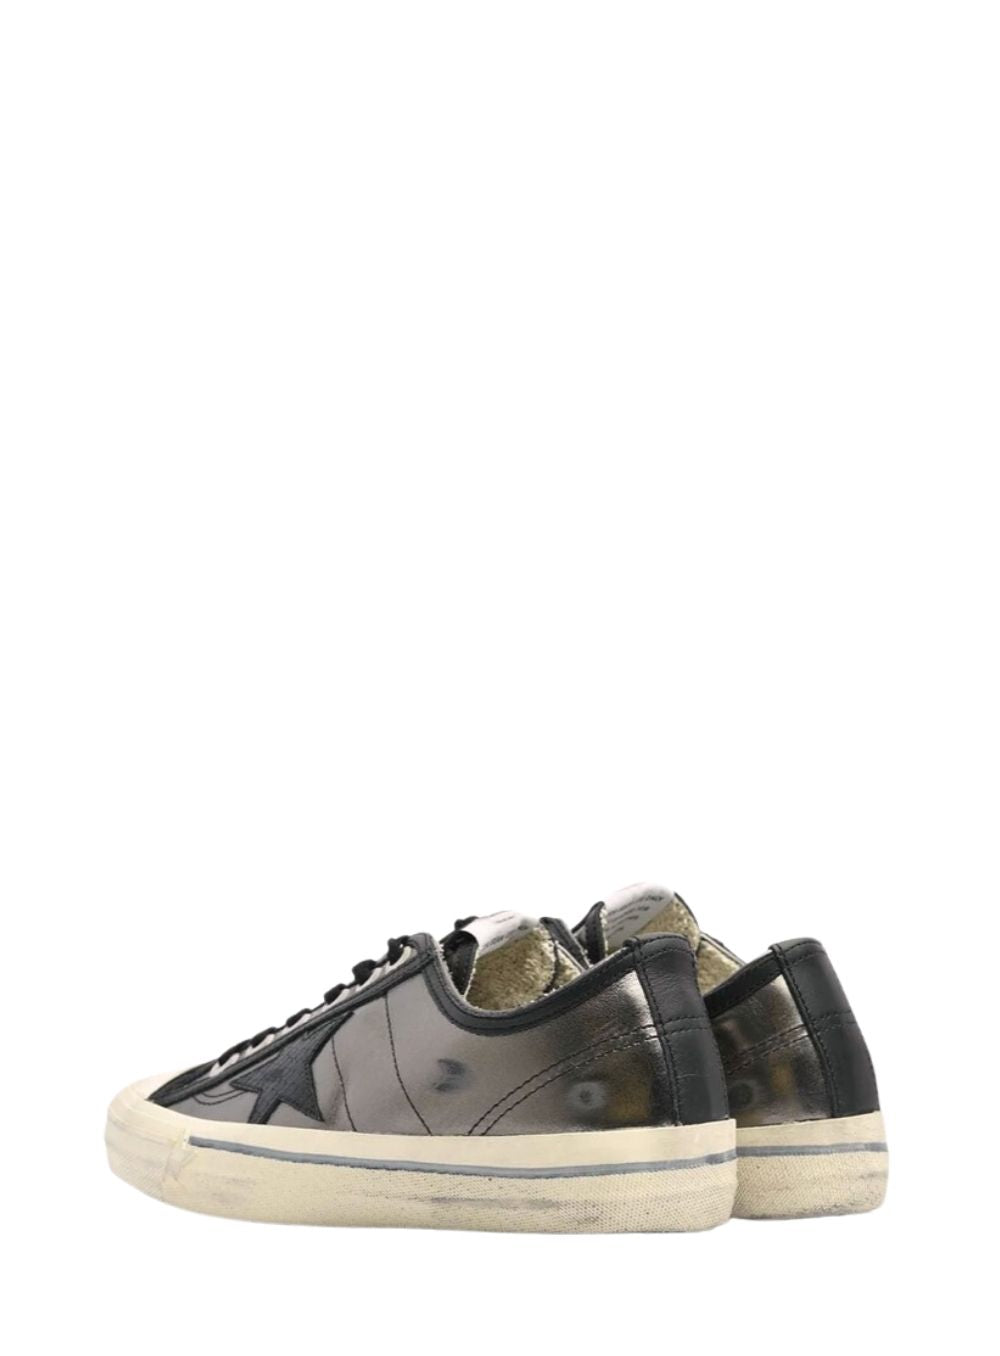 GOLDEN GOOSE | V-Star Laminated Sneakers With Python Print Star